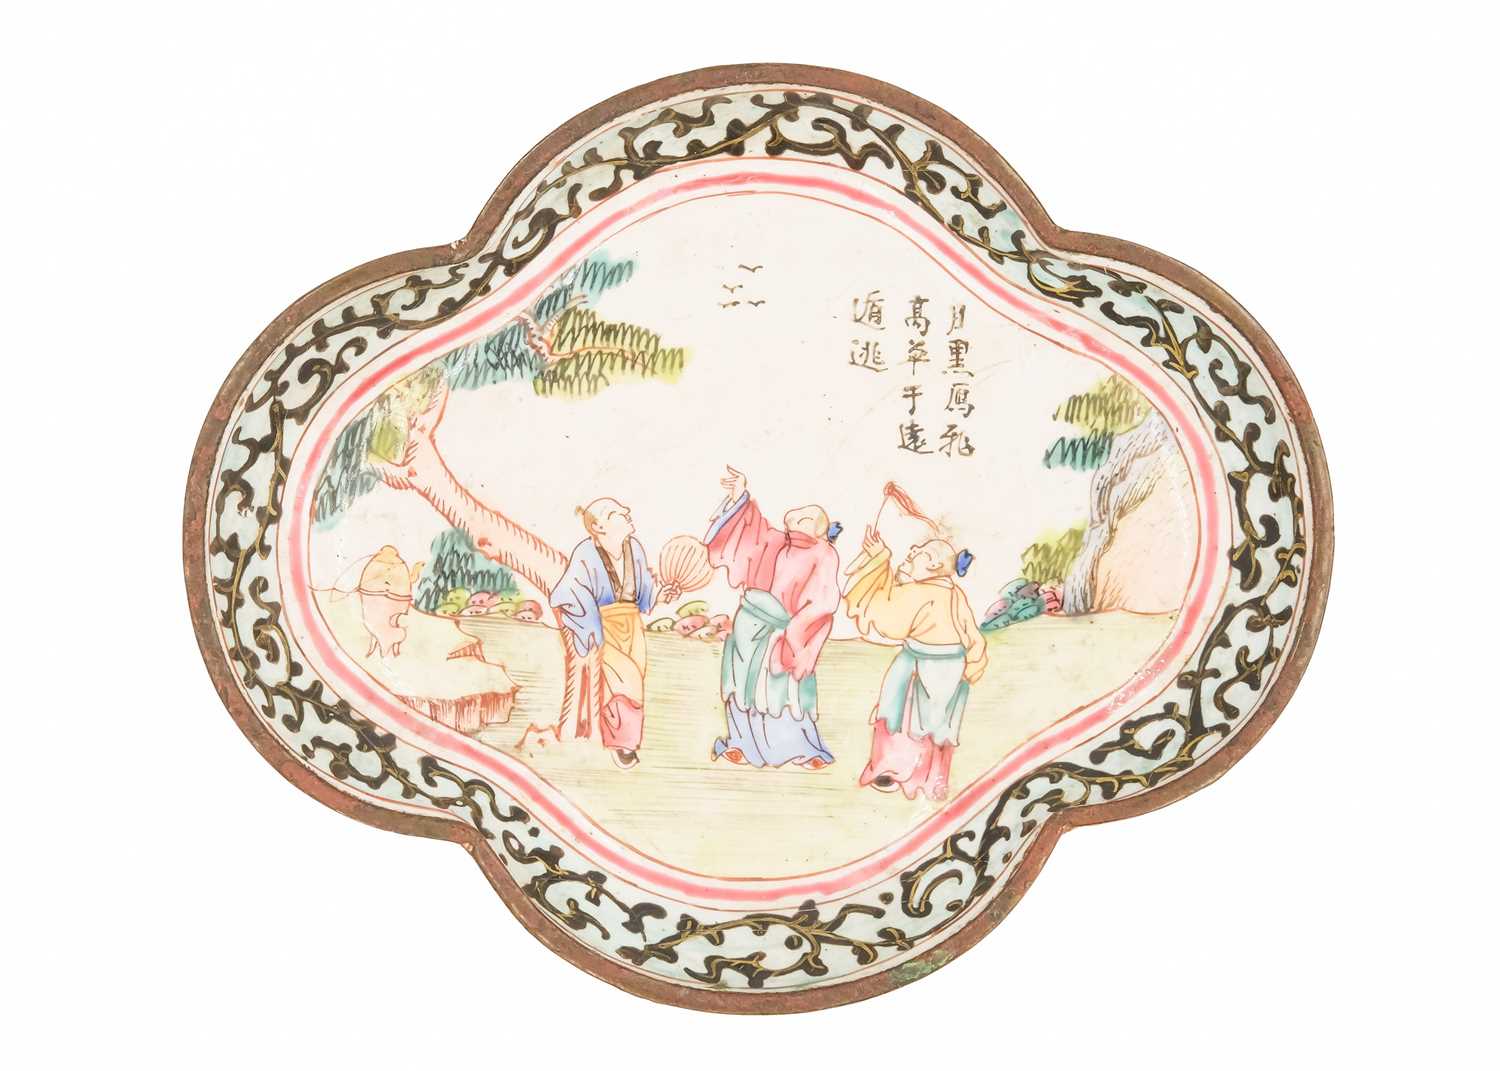 A Chinese Canton enamel lobed dish, Qing Dynasty, late 18th century. - Image 5 of 6